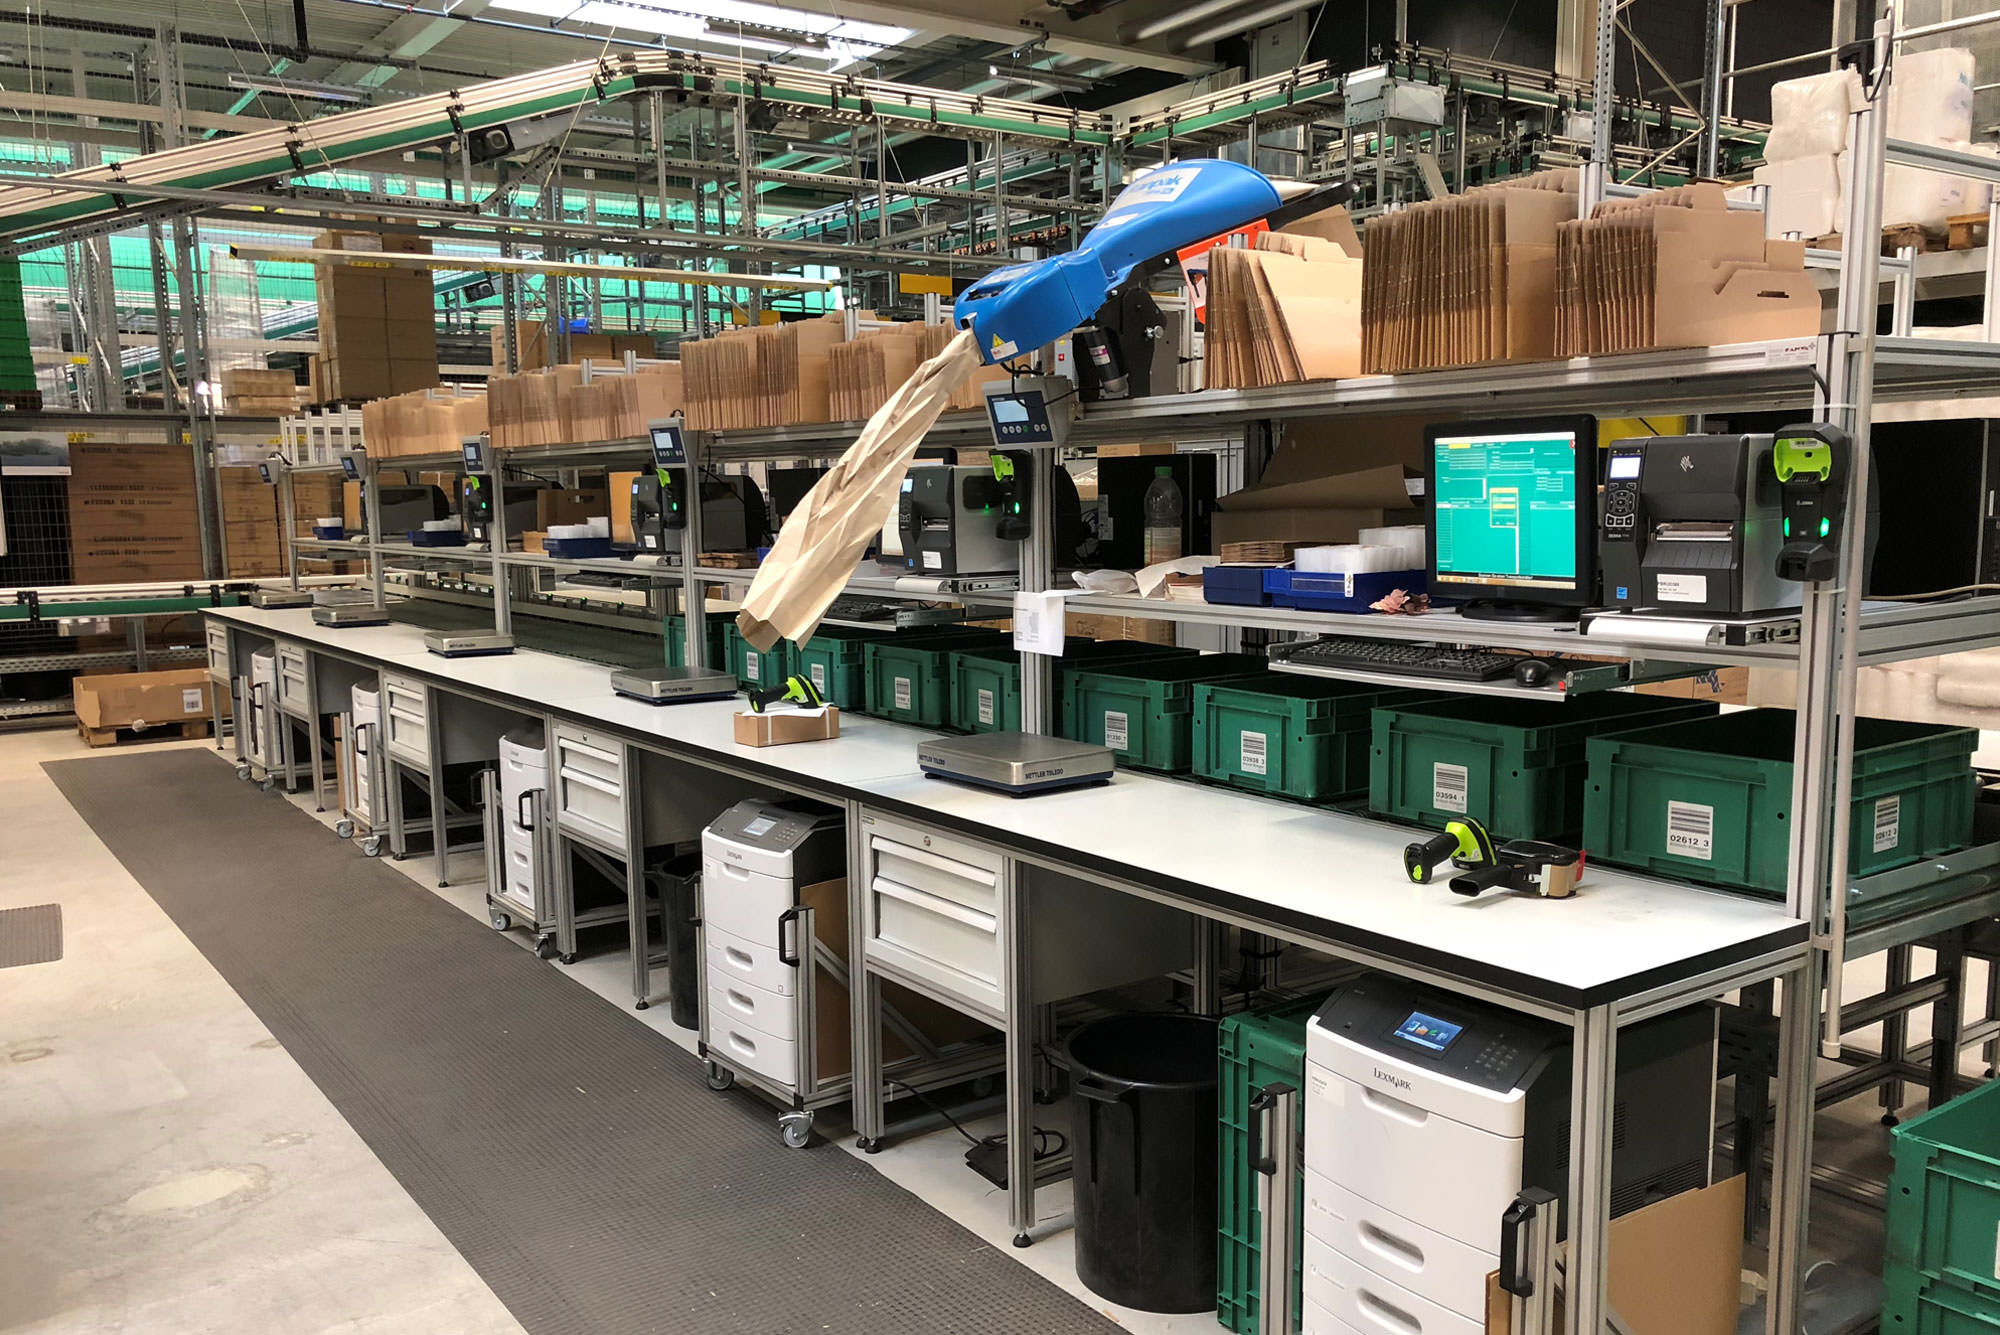 Packaging workplace in the logistics